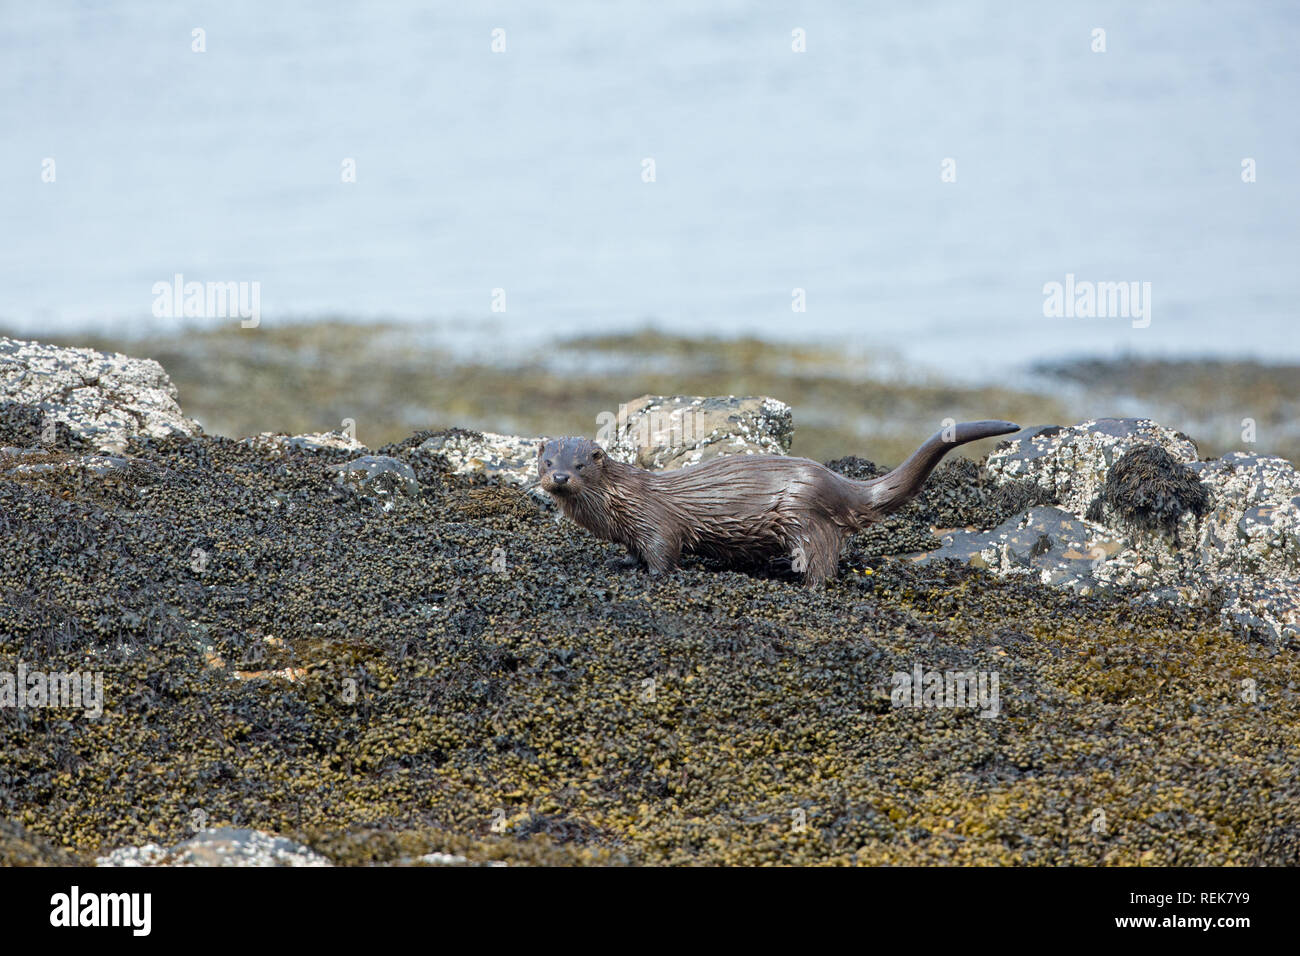 Otter (Lutra lutra). Tail, or rudder, lifted and Spraint marking, midst Bladder Wrack brown seaweed, and Acorn Barnacle covered rocks on the seashore. The Island of Mull. West coast of Scotland. Stock Photo